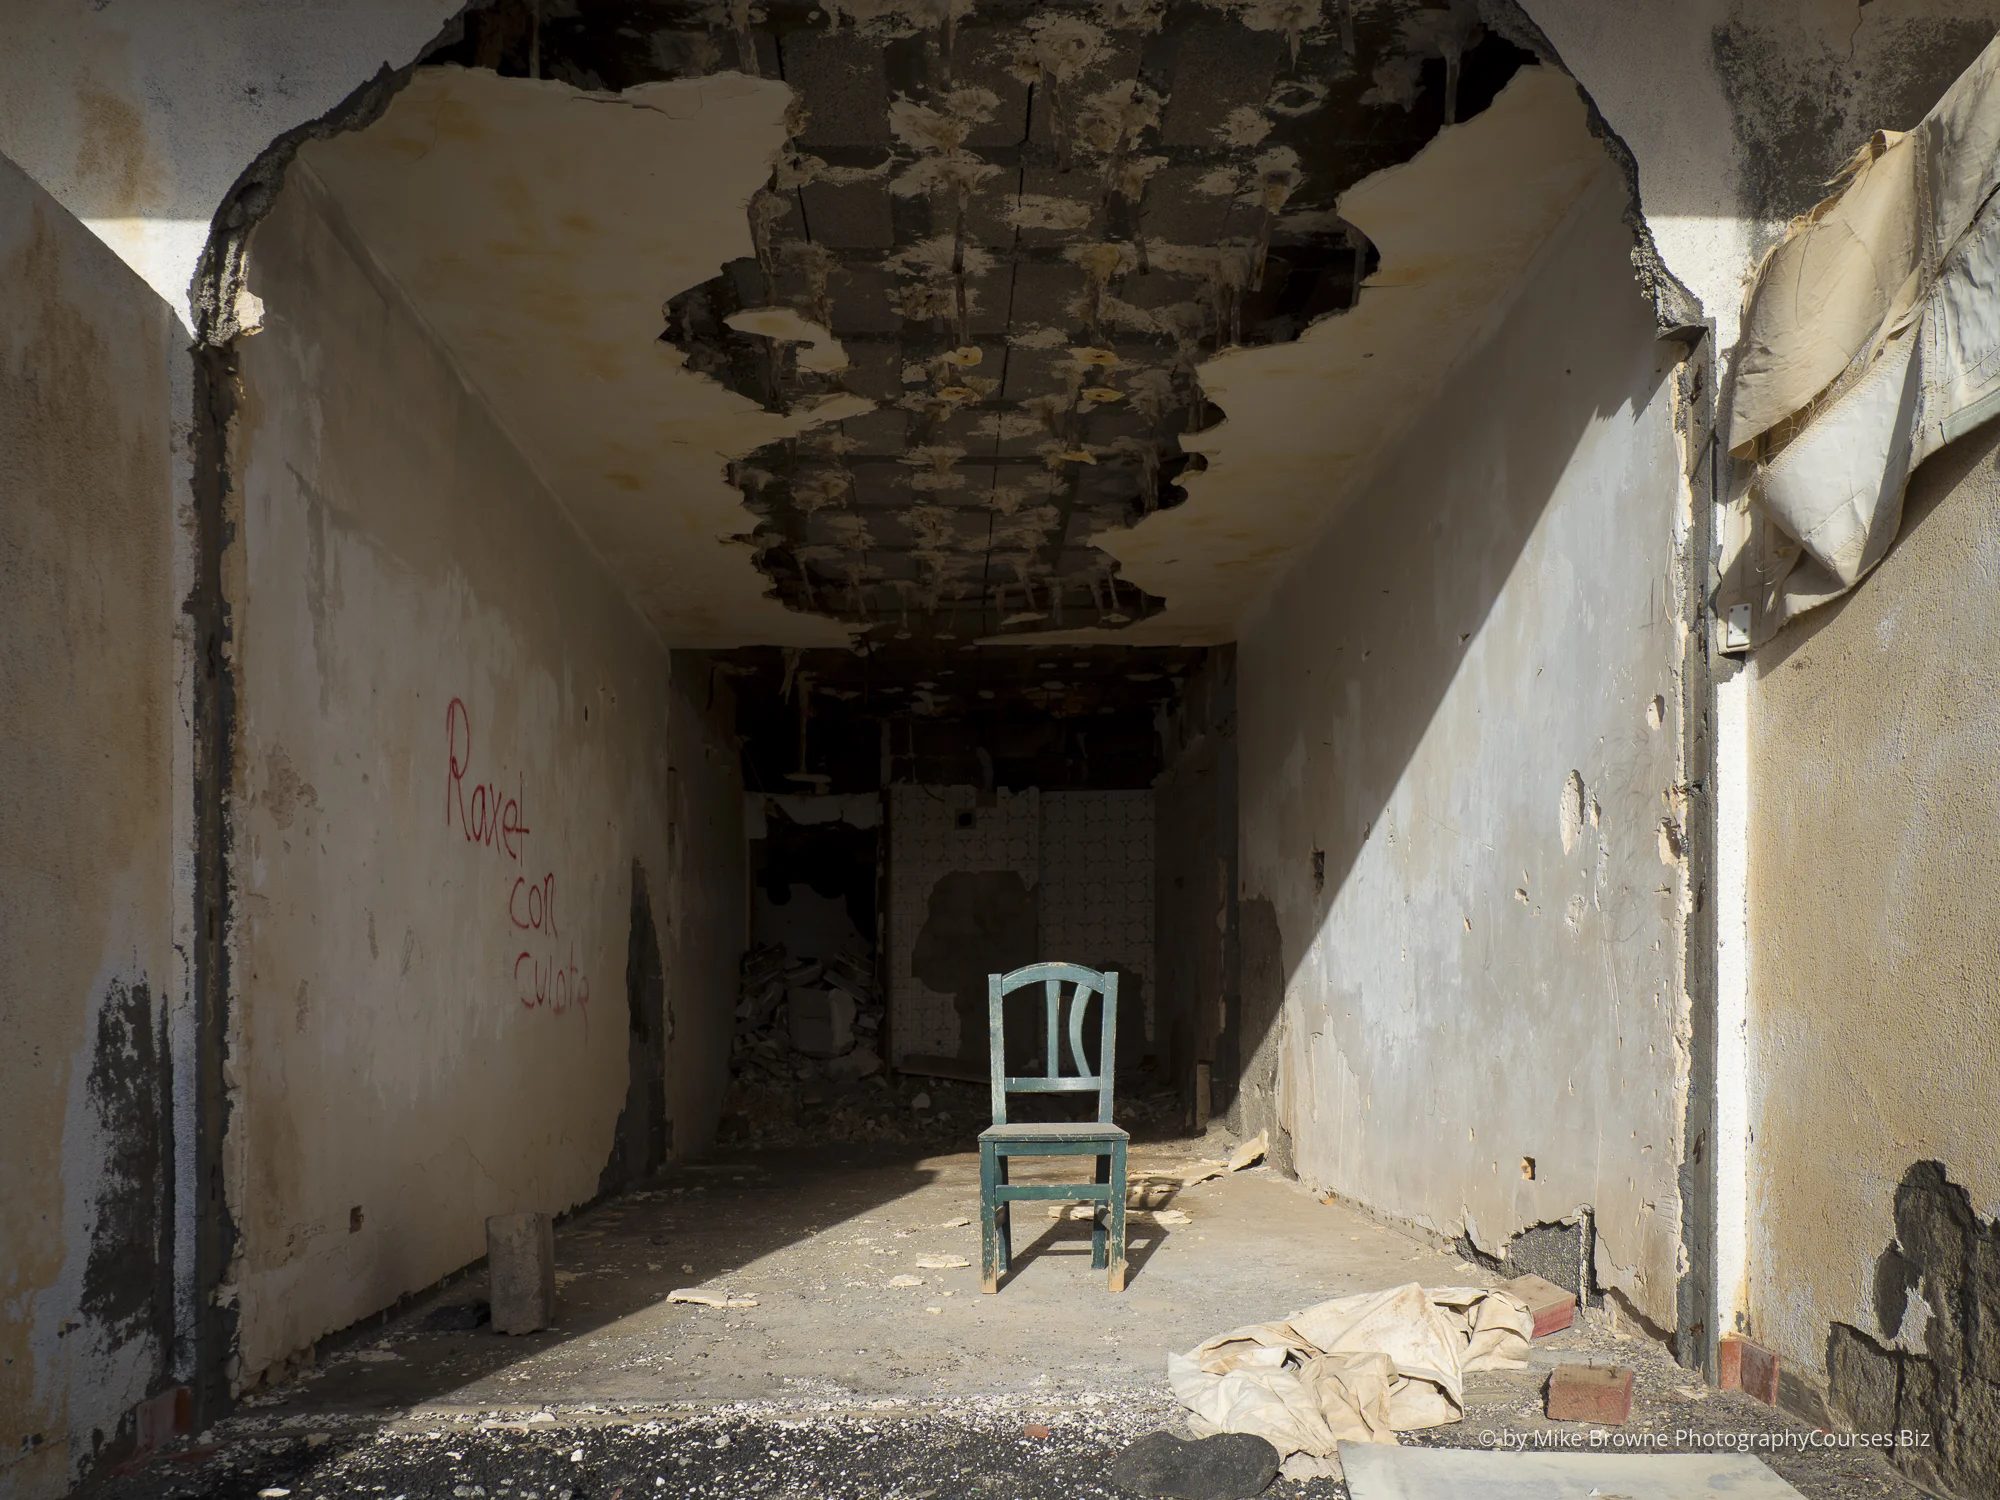 Green chair and diagonal shadow amidst ruins of abandoned hotel